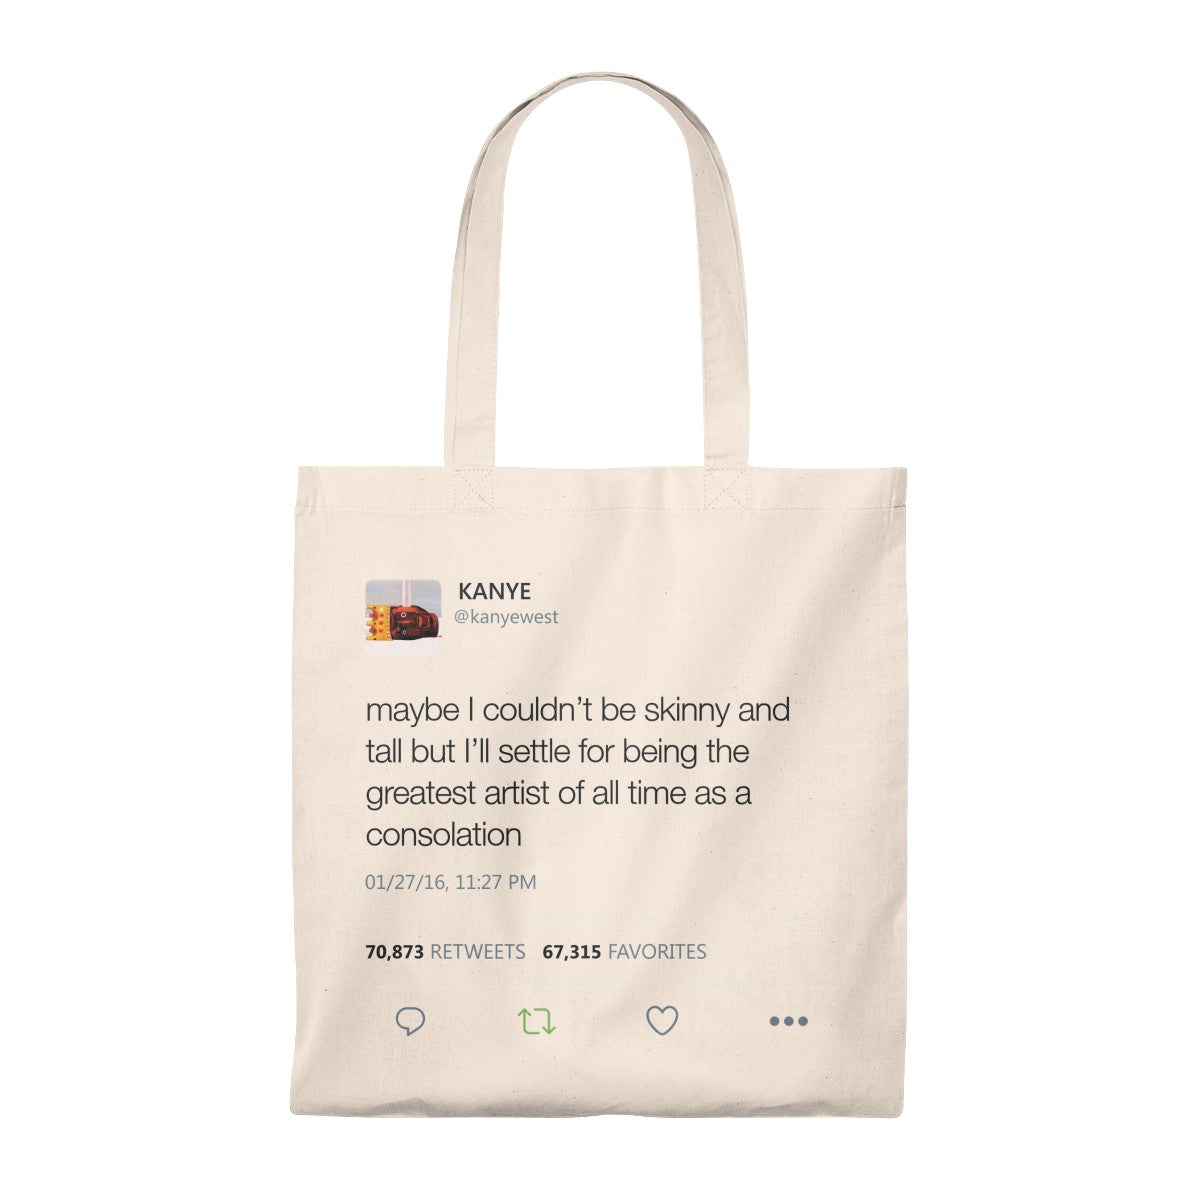 Maybe I Couldn't Be Skinny And Tall But I'll Settle For Being The Greatest Artist Of All Time.. Kanye West Tweet Tote Bag-Natural/Natural-Archethype